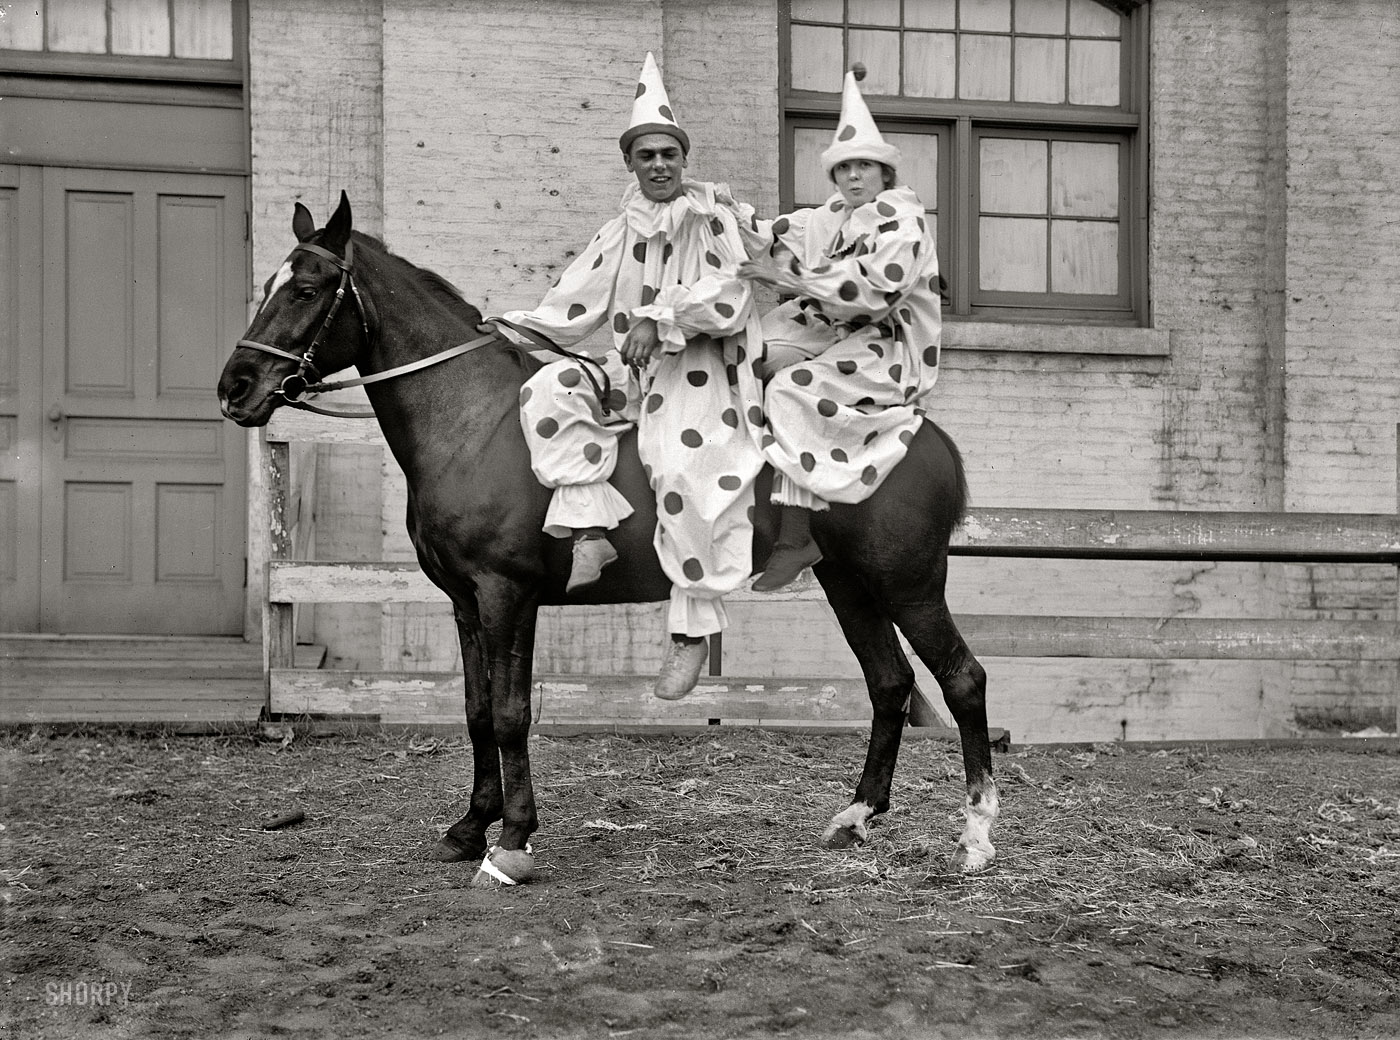 Circa 1916. "Society Circus. Clowns on a horse." The poor horse being the straight man in this act. Harris & Ewing Collection glass negative. View full size.